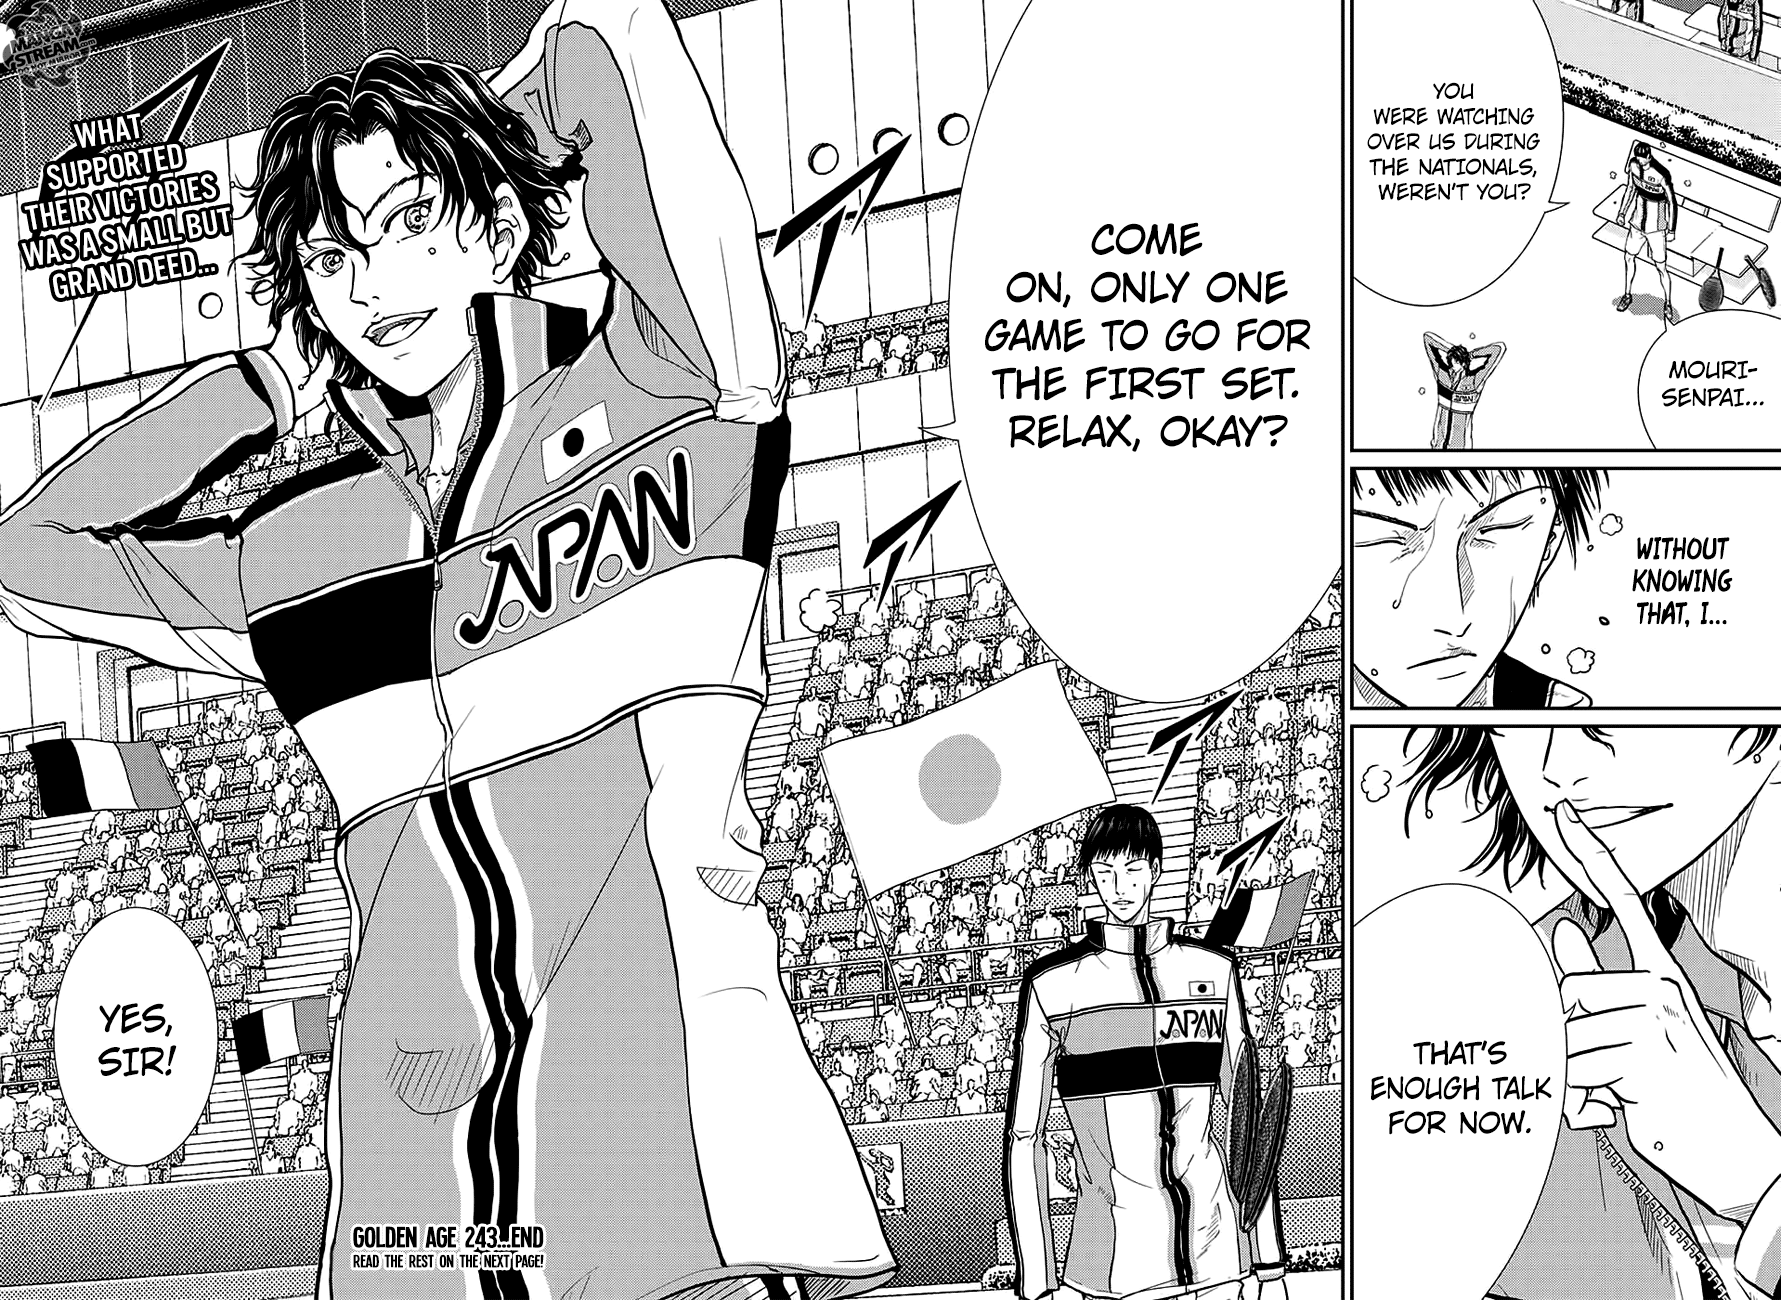 New Prince of Tennis 243